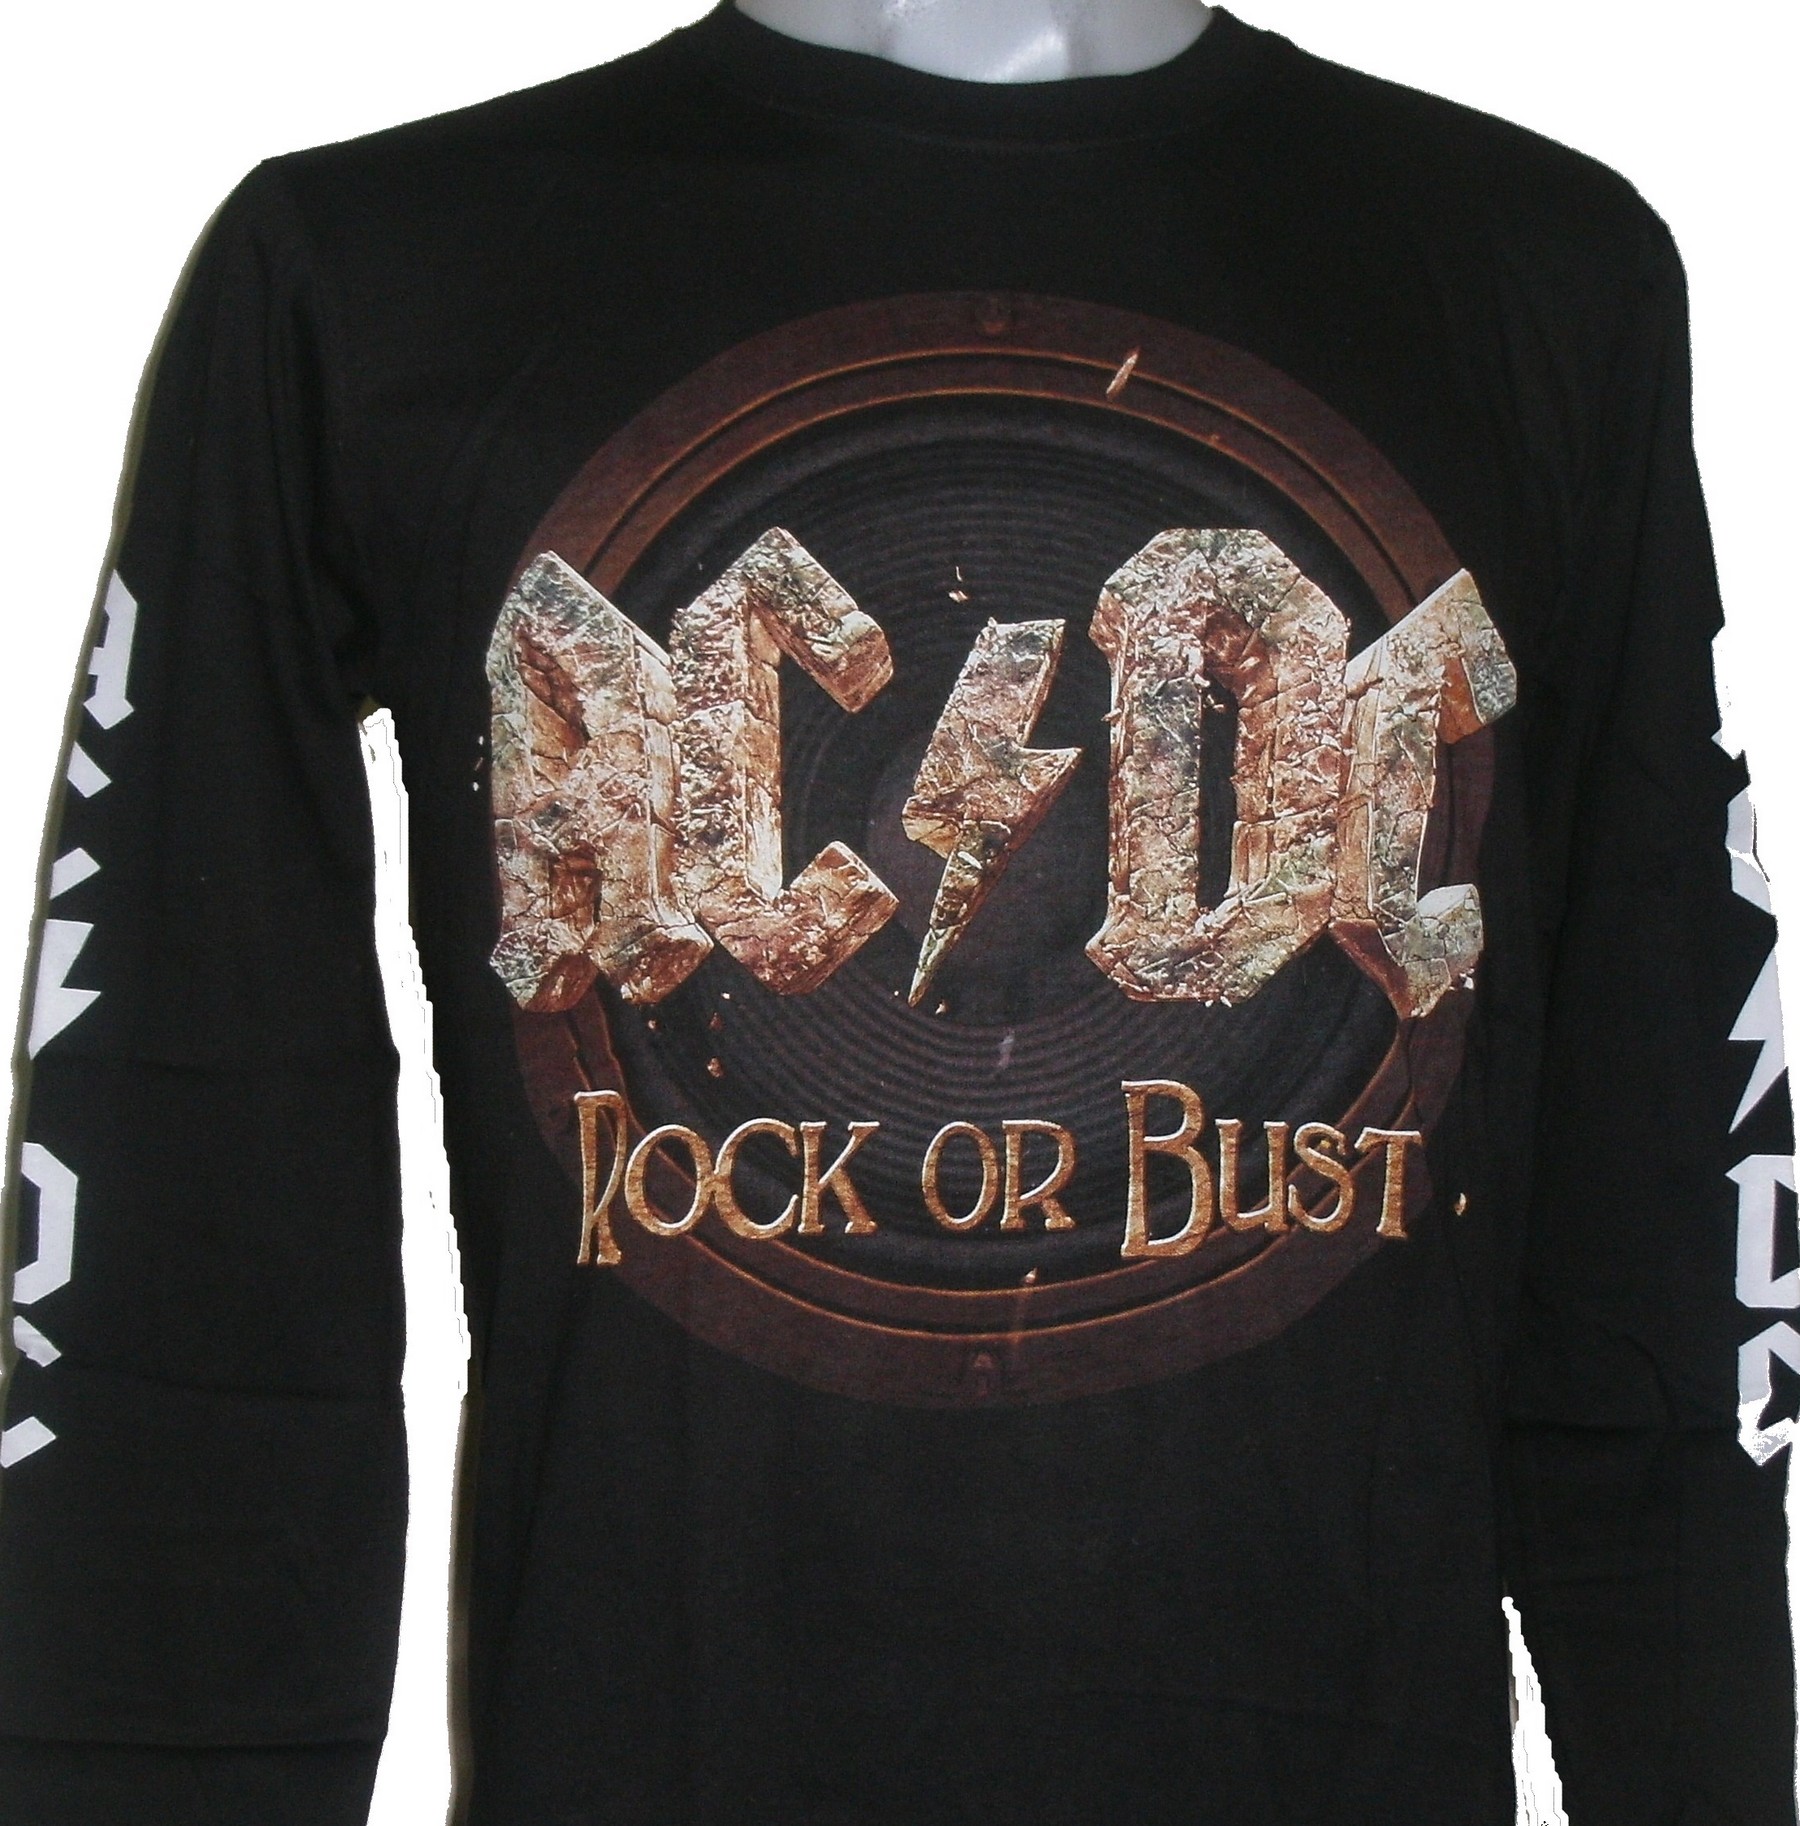 Expansion amateur Lunar New Year AC/DC long-sleeved t-shirt Rock or Bust size M – RoxxBKK